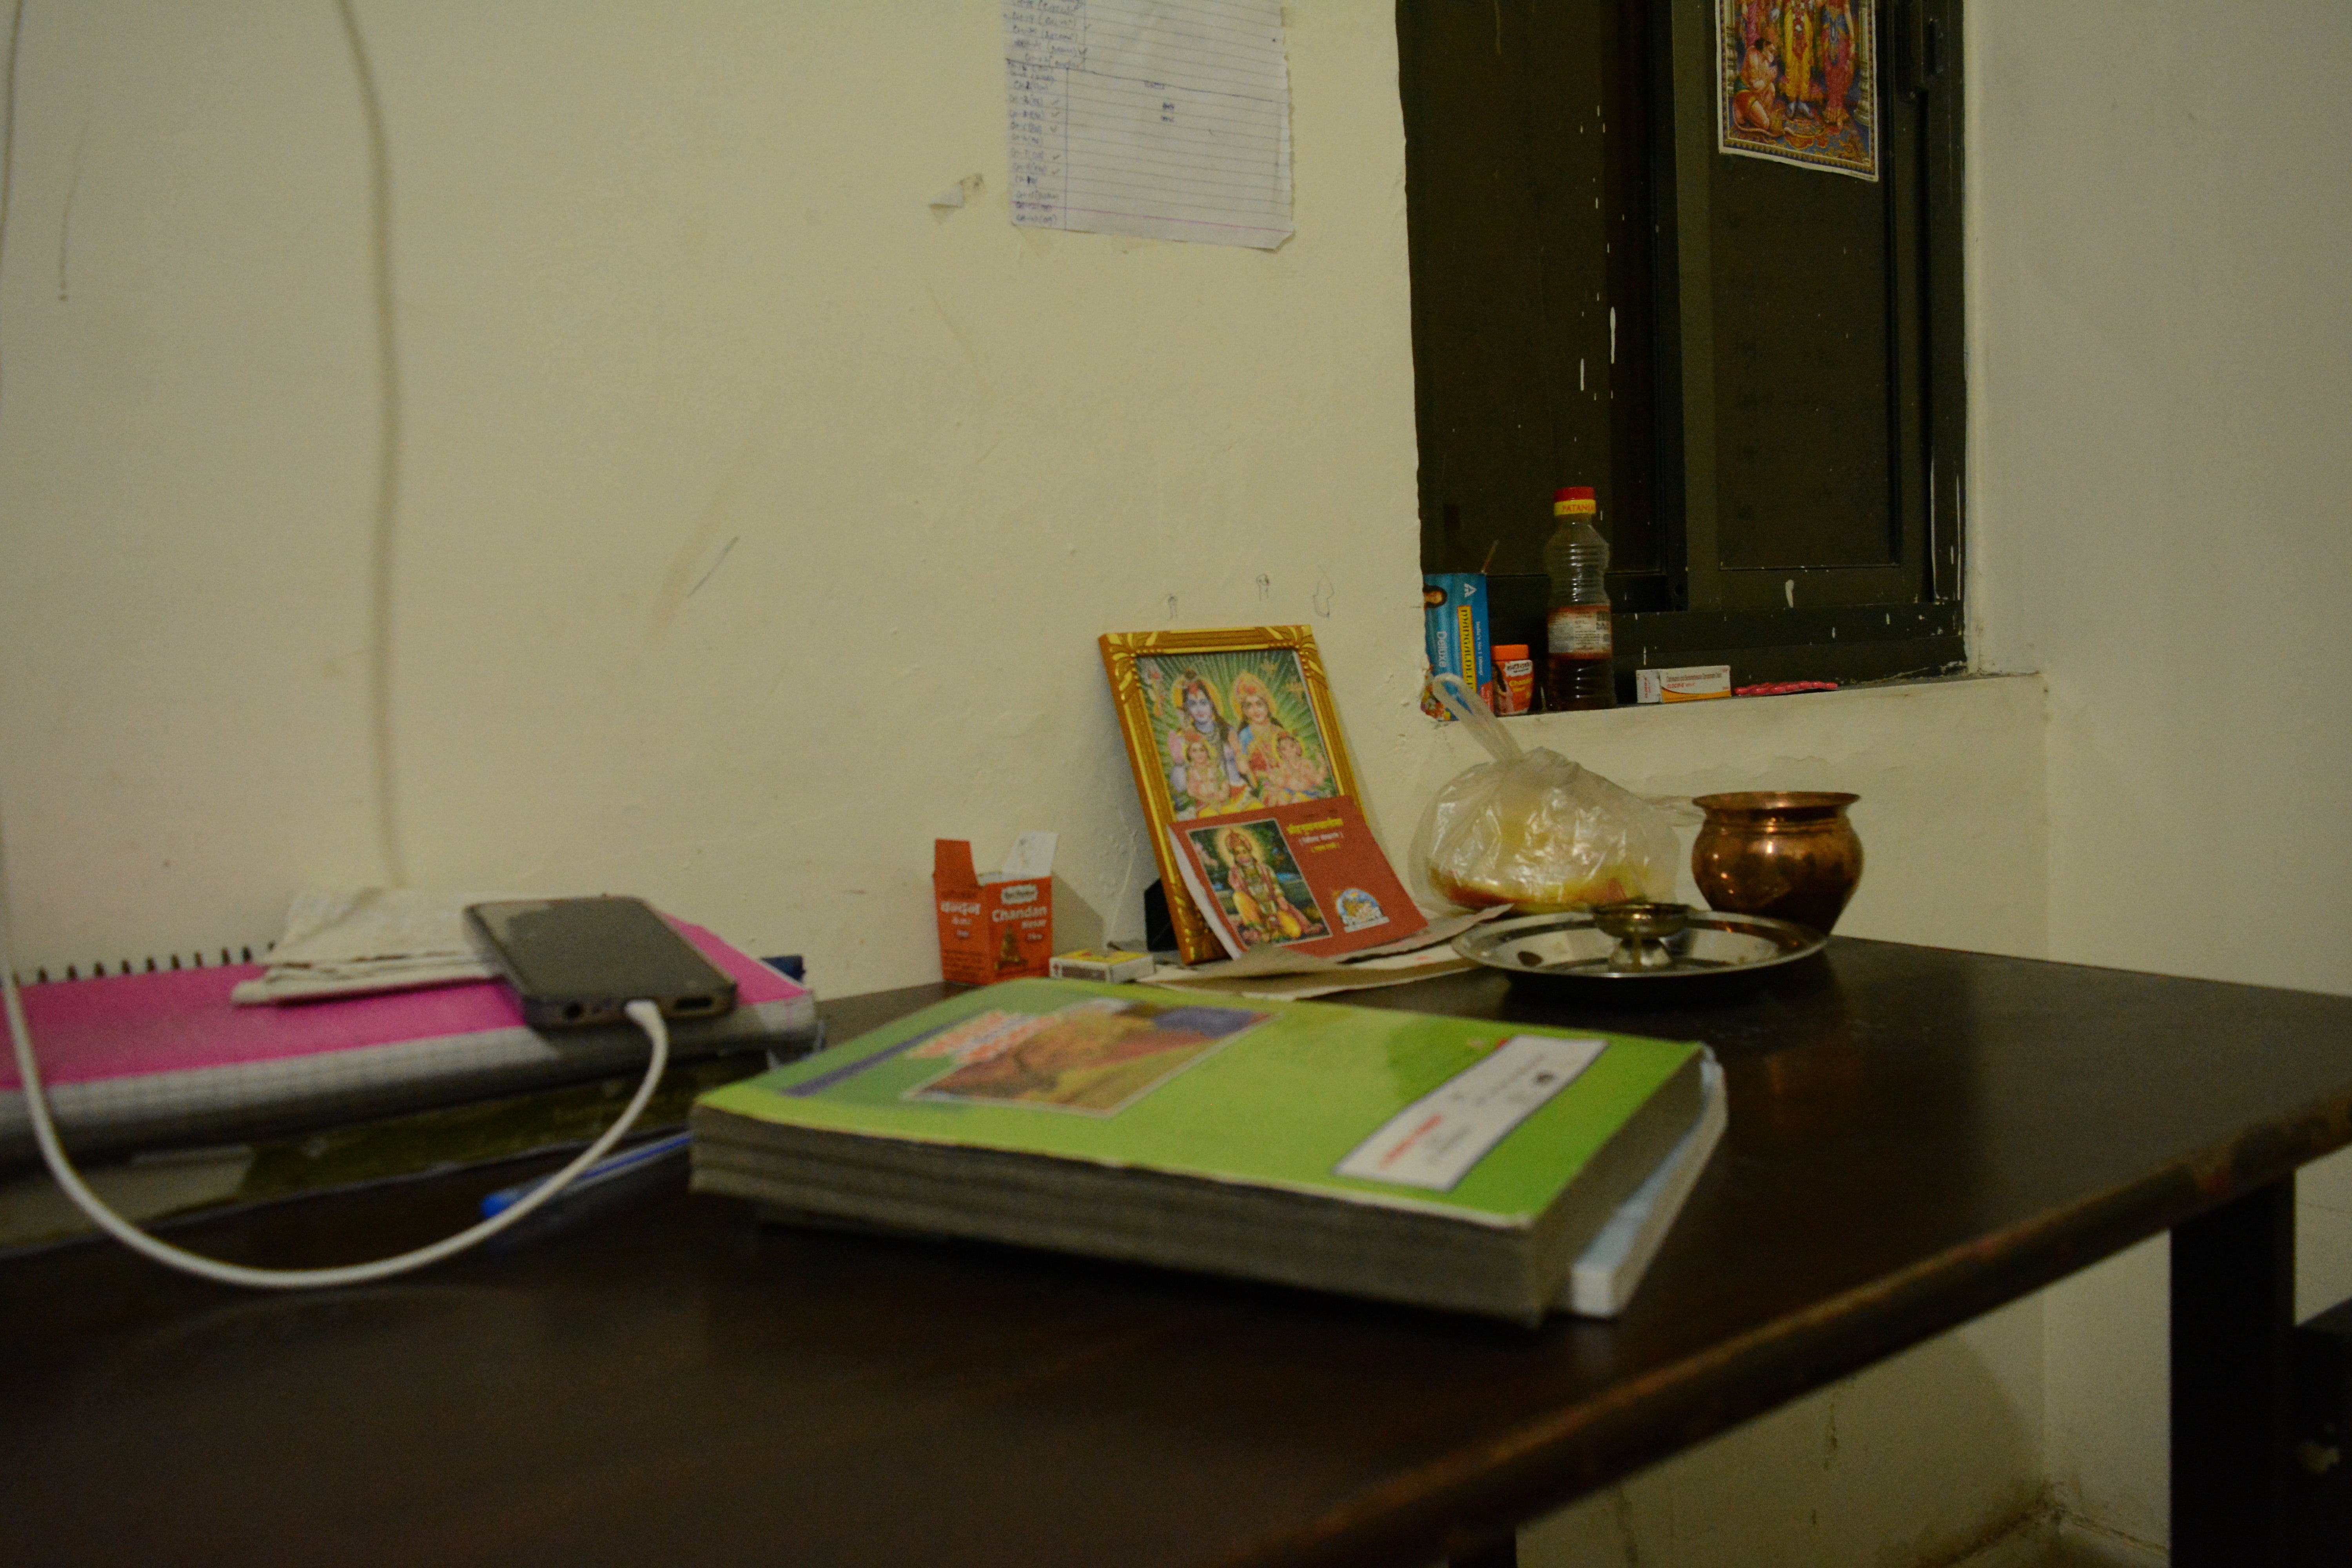 Picture of Hindu gods and goddesses placed on study table in a hostel room in Kota